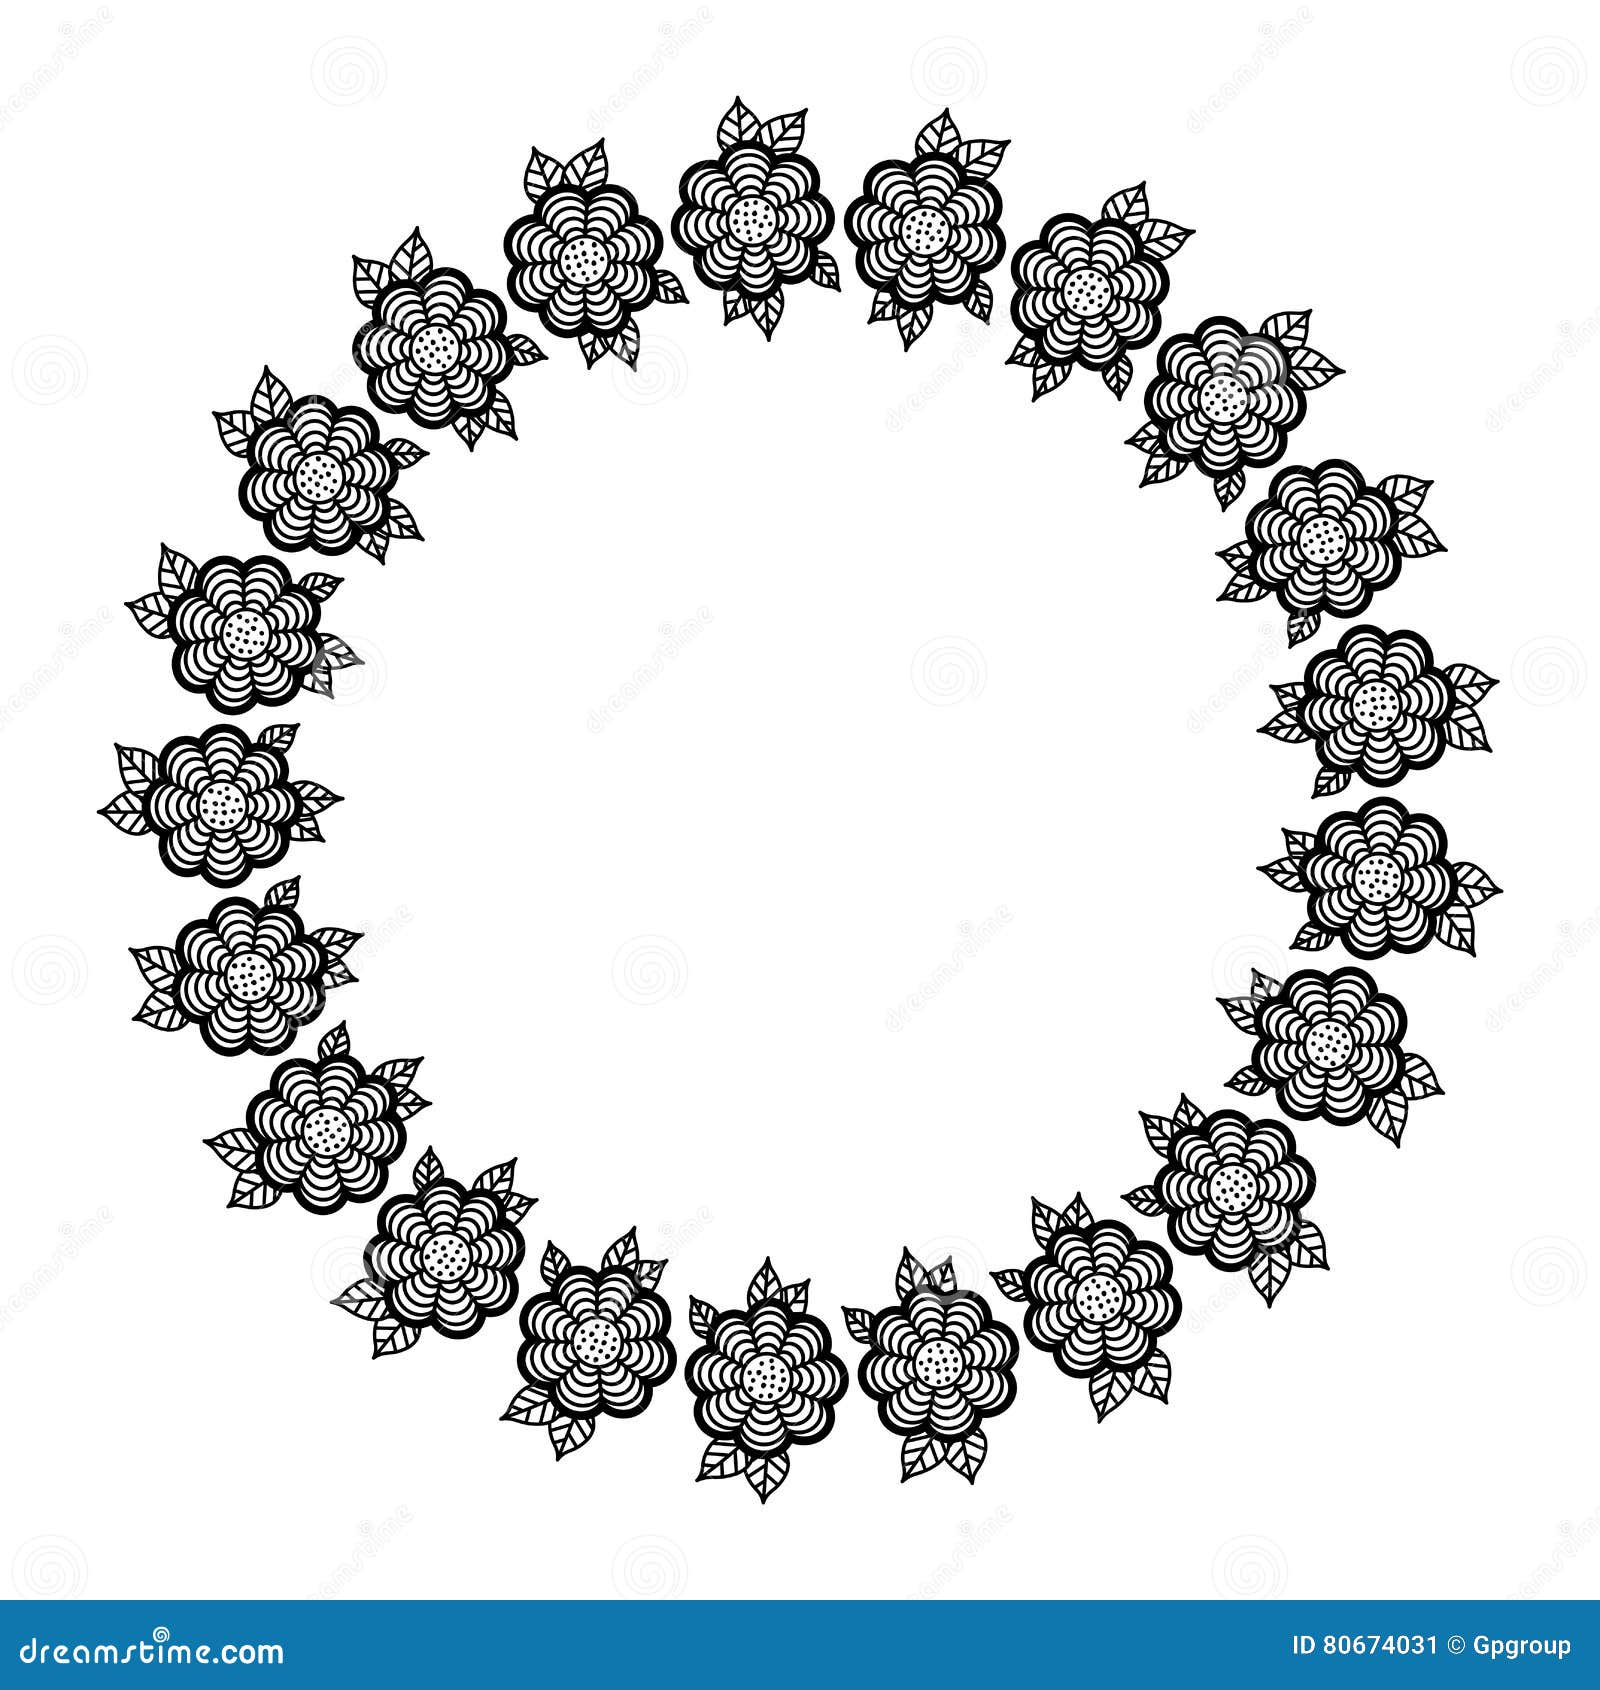 Isolated Flowers Crown Decoration Design Stock Vector - Illustration of